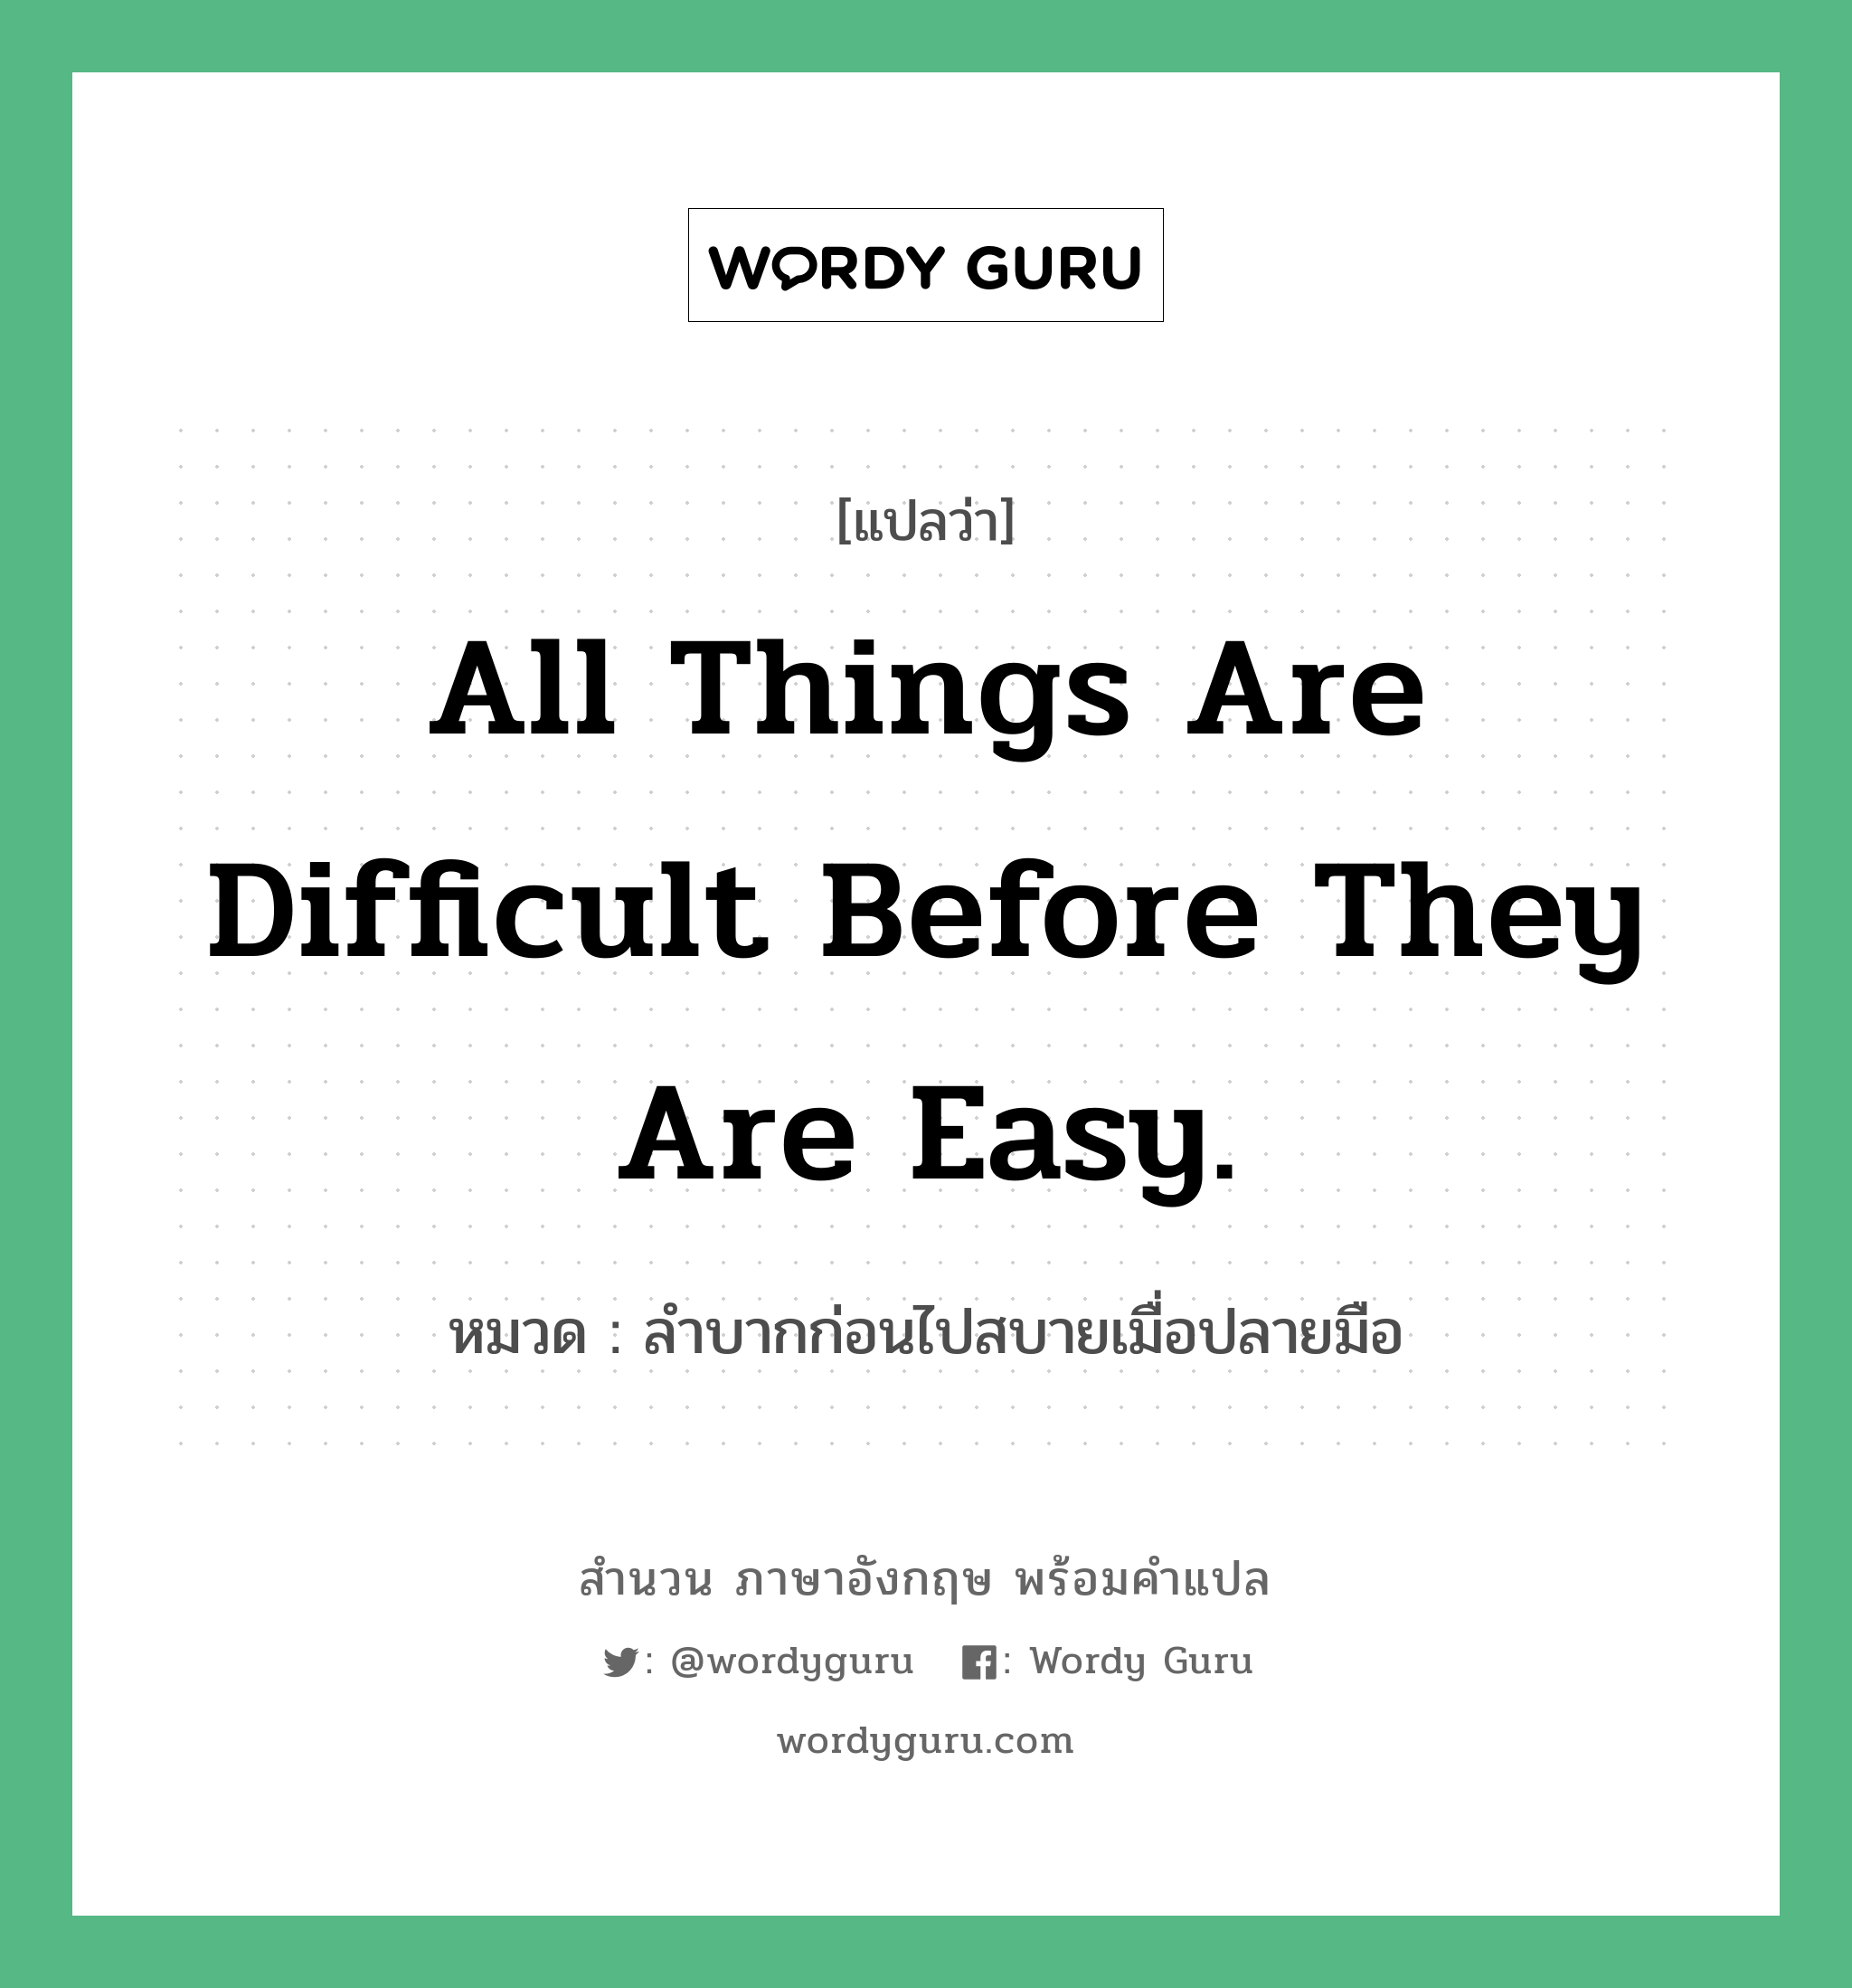 All things are difficult before they are easy. แปลว่า?, สำนวนภาษาอังกฤษ All things are difficult before they are easy. หมวด ลำบากก่อนไปสบายเมื่อปลายมือ คำสุภาษิต ภาษาอังกฤษ หมวด คำสุภาษิต ภาษาอังกฤษ